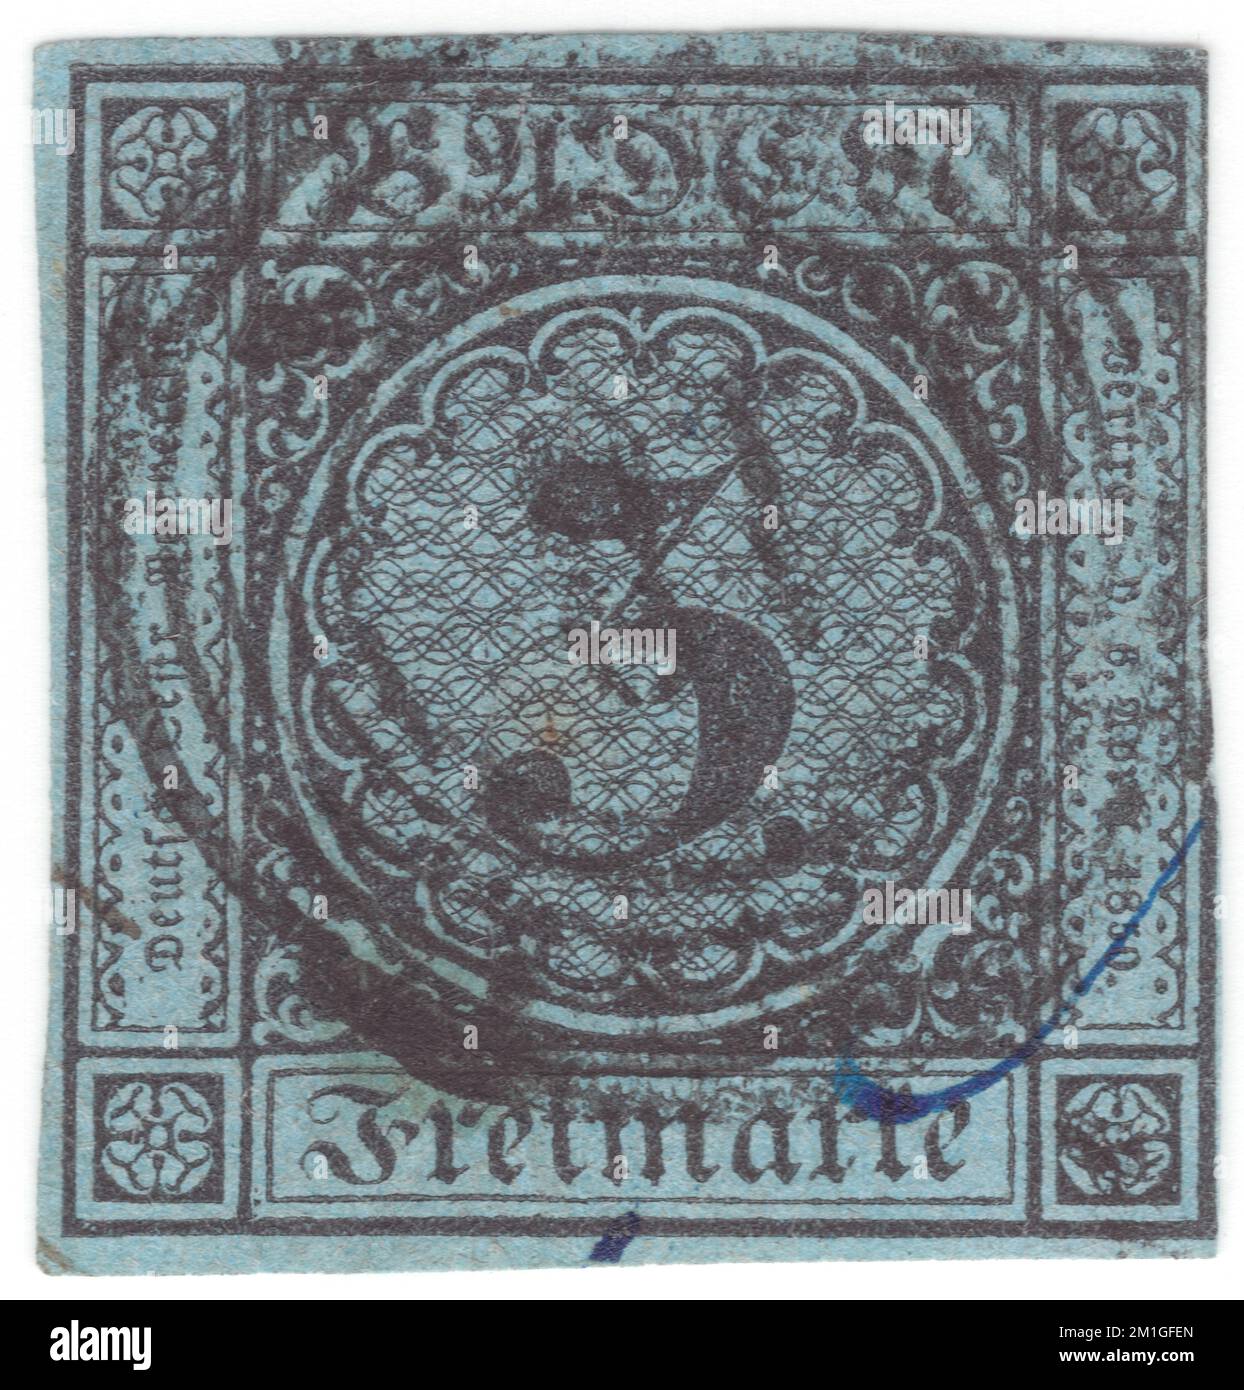 BADEN (One of the German states) — 1861: original old and rare 3 kreuzer ultramarine postage stamp showing coat of arms with shaded background behind Arms Stock Photo